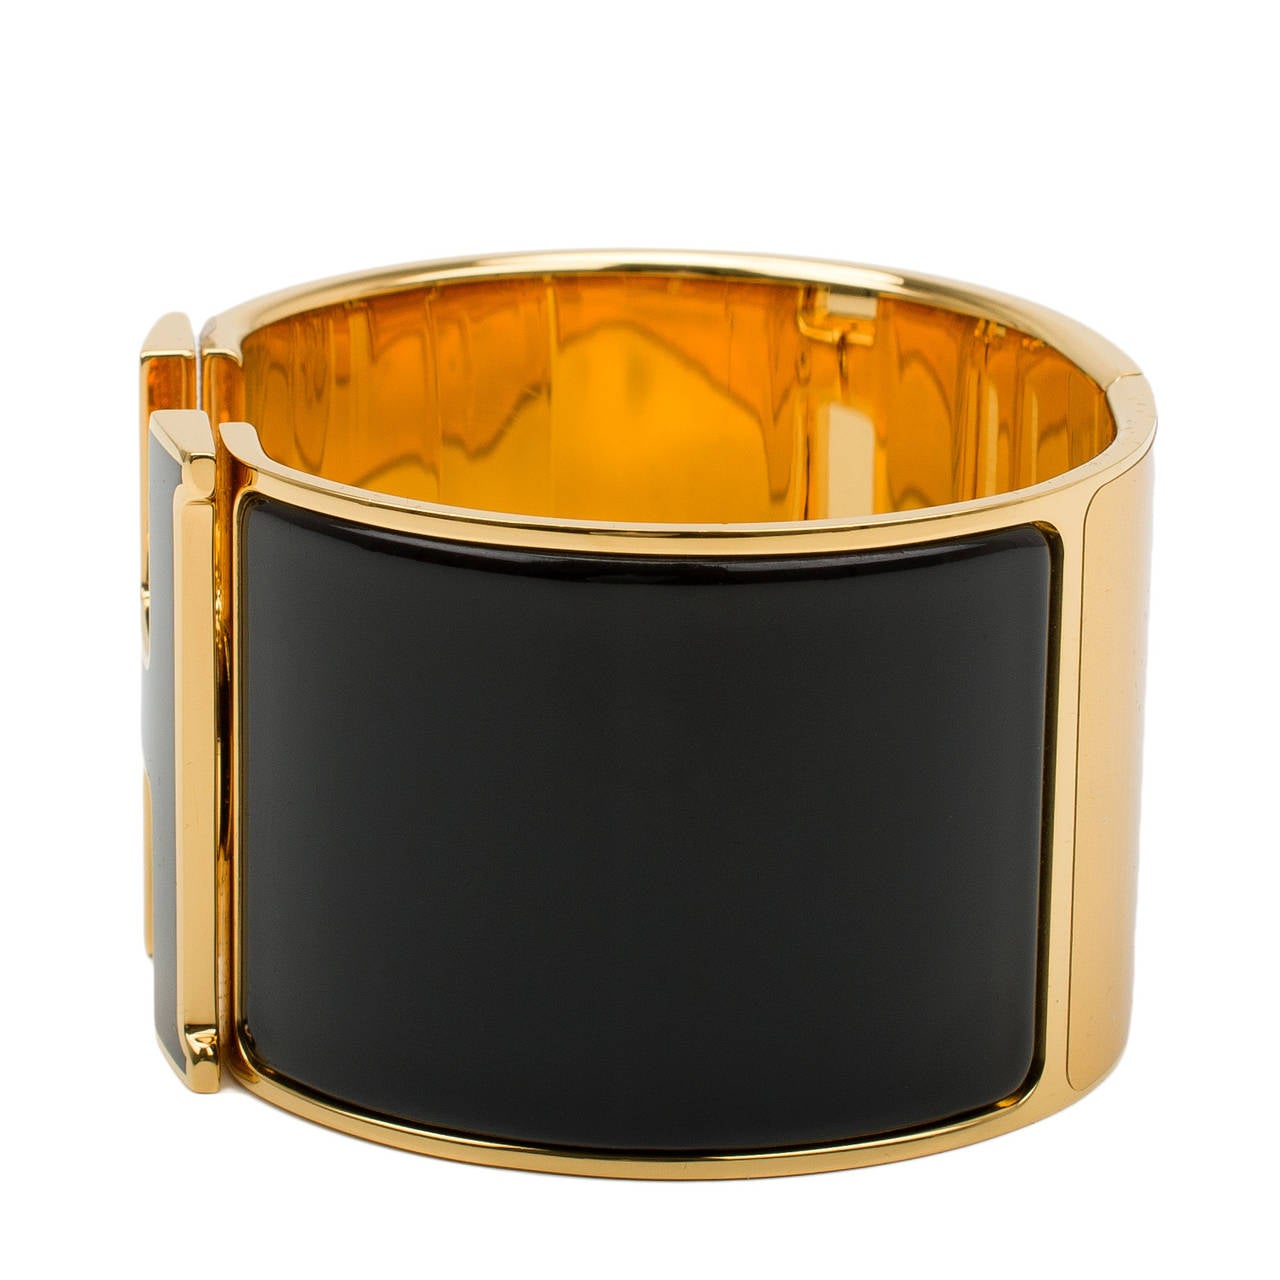 Hermes extra wide Clic Clac H bracelet in black with black enamel H closure with gold plated hardware in size PM.

Hermes is renowned for its enamel and leather bracelets. Hermes printed enamel bangles, enamel Clic Clac H bracelets, and